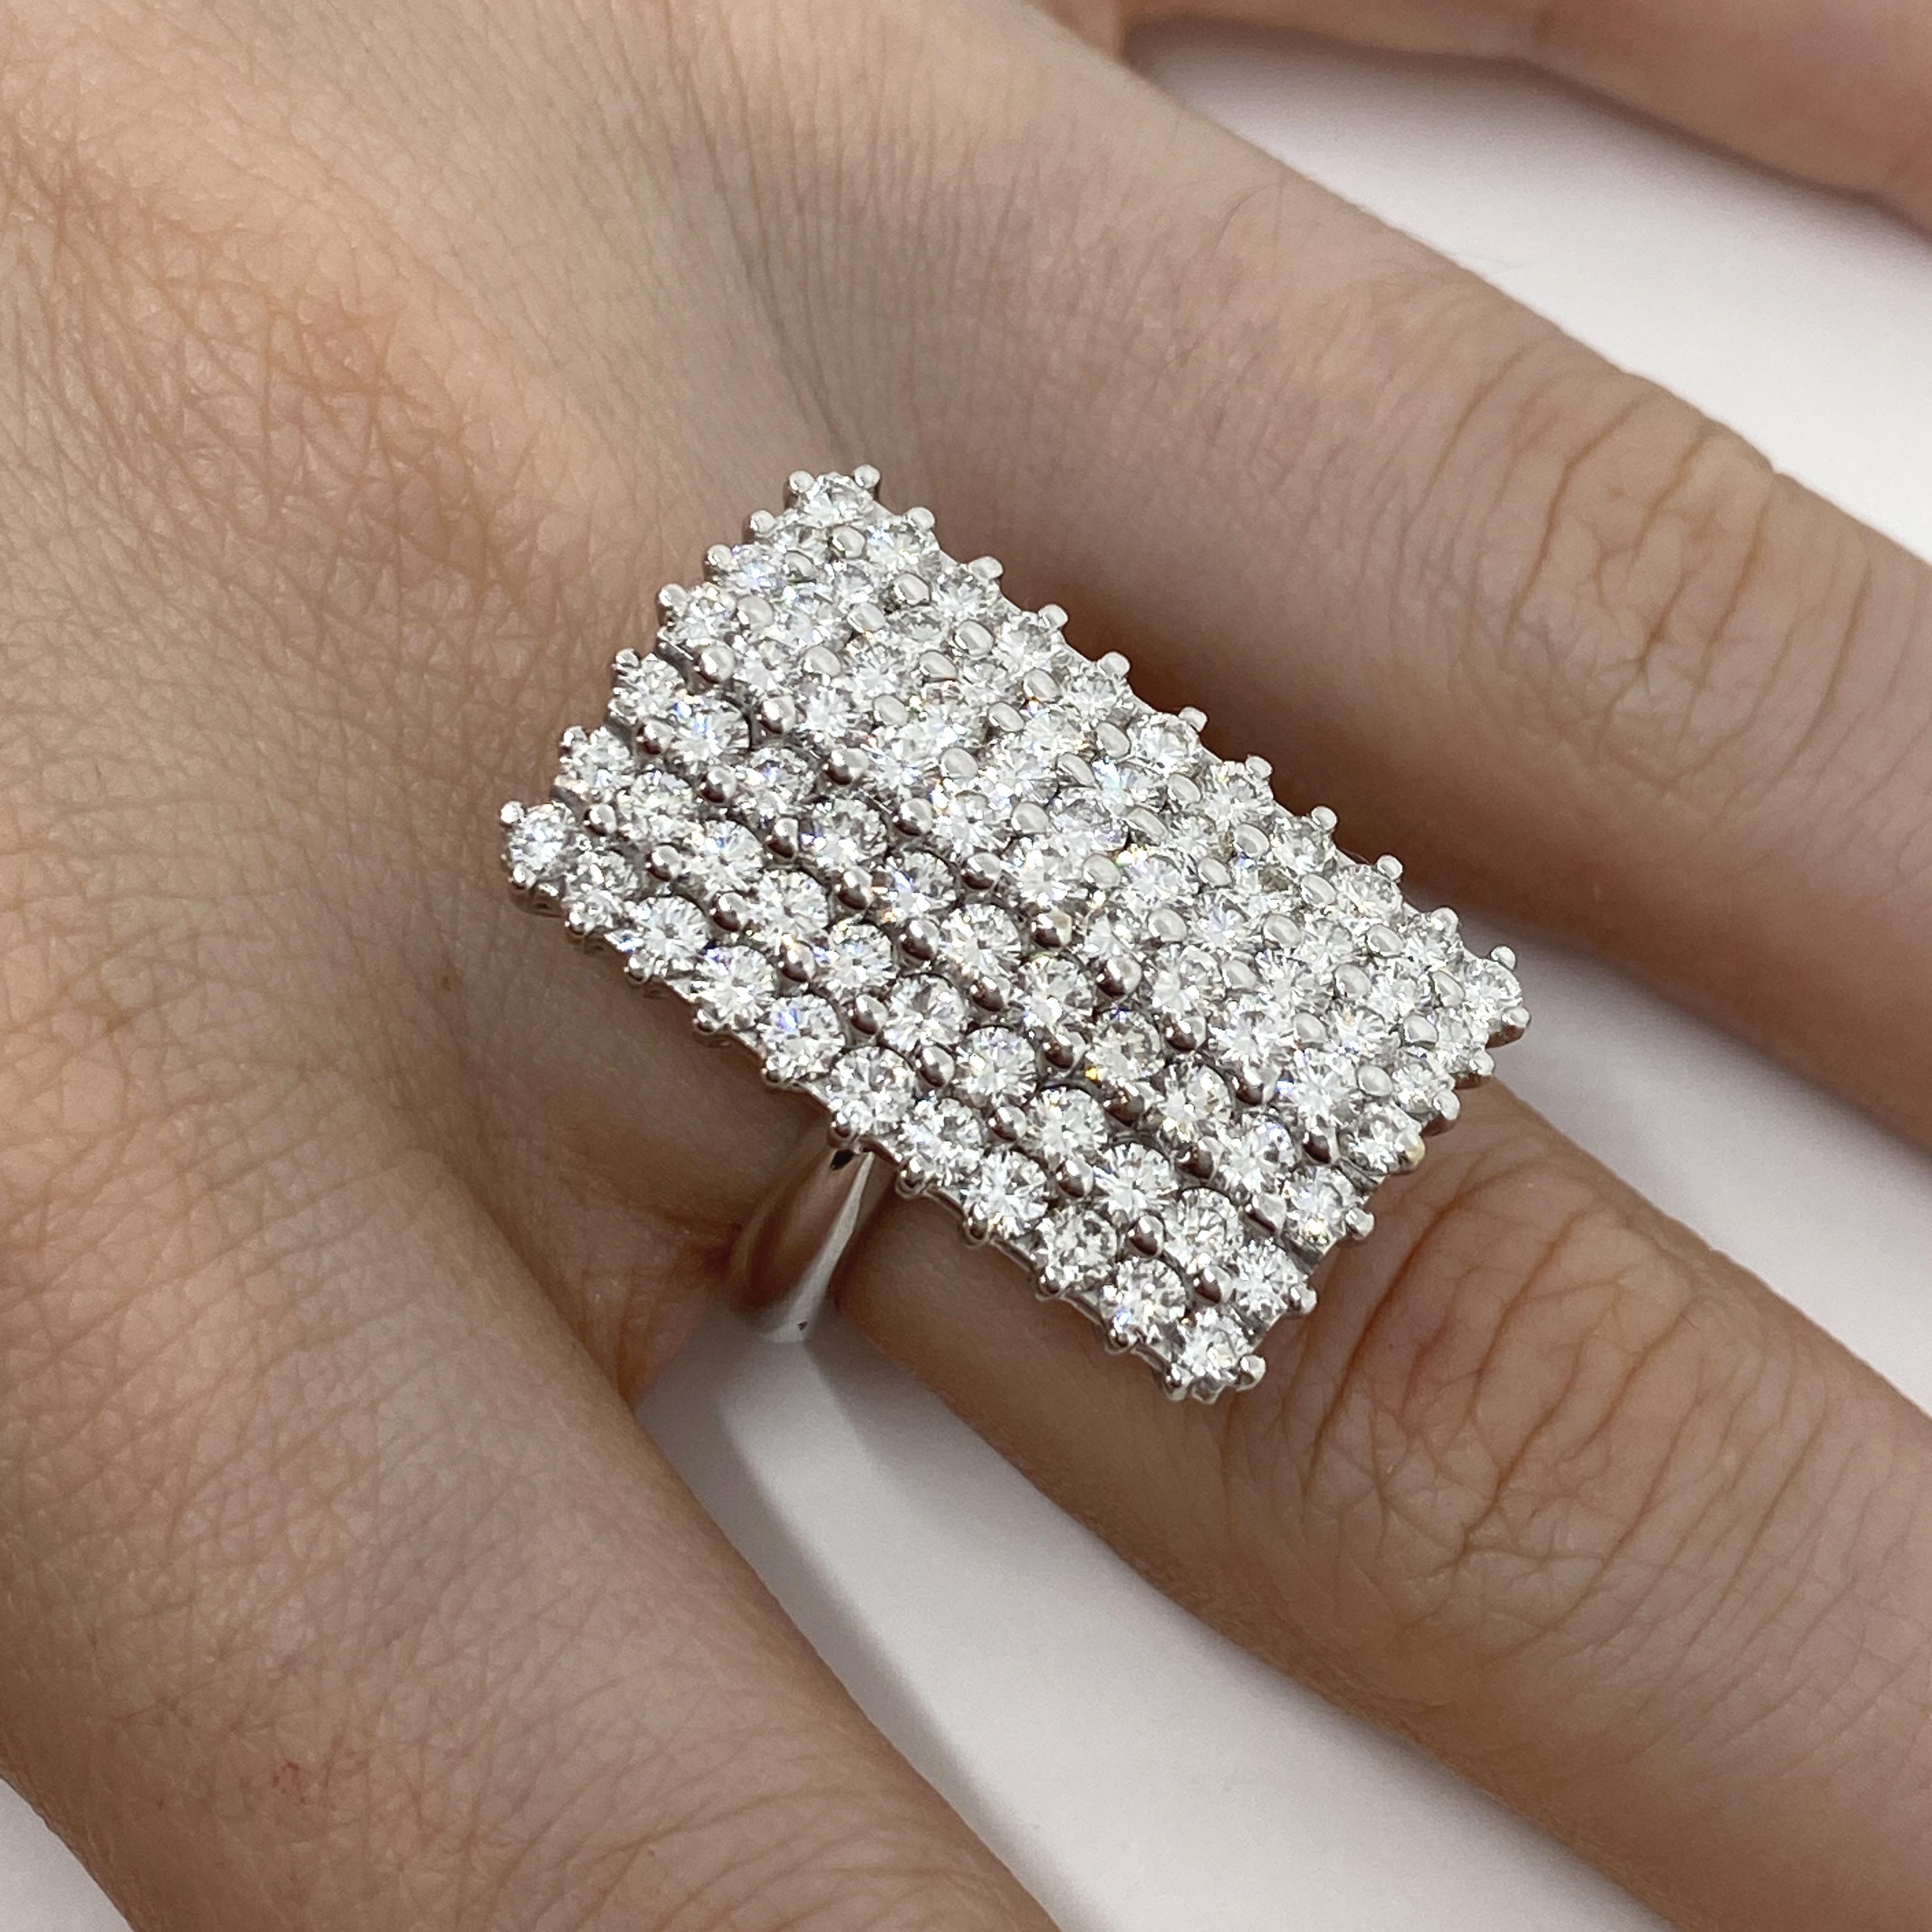 Ring made of 18kt white gold with white brilliant-cut natural diamonds for ct.3.65
-------------------------------------------------

Important Note : In order to speed up the publishing process of our vast inventory, this jewelry only features 1